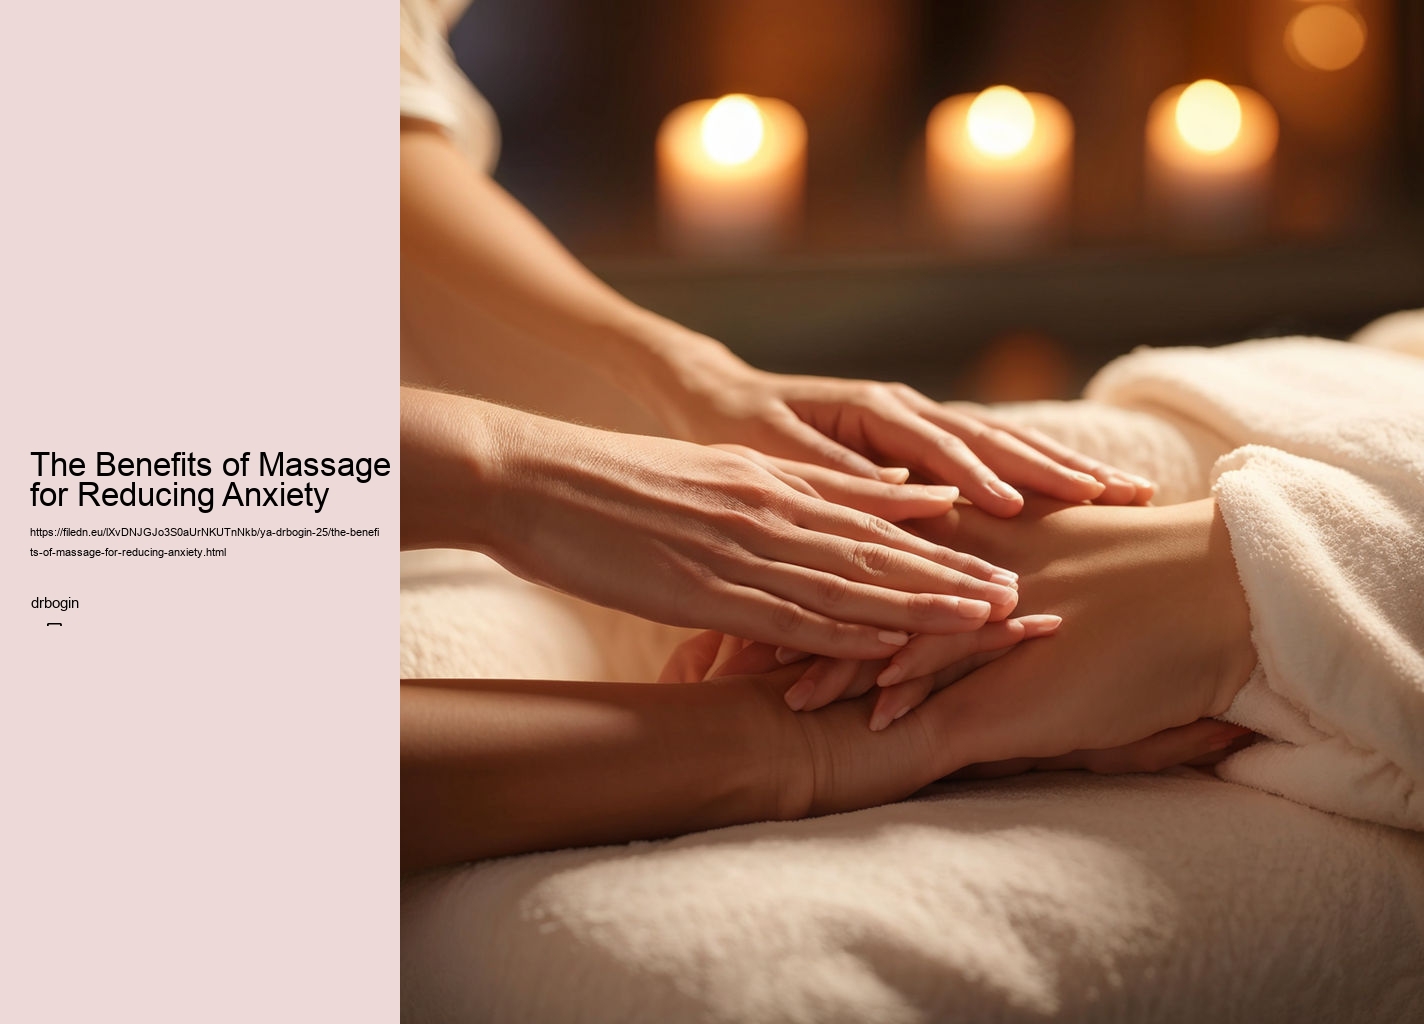 The Benefits of Massage for Reducing Anxiety